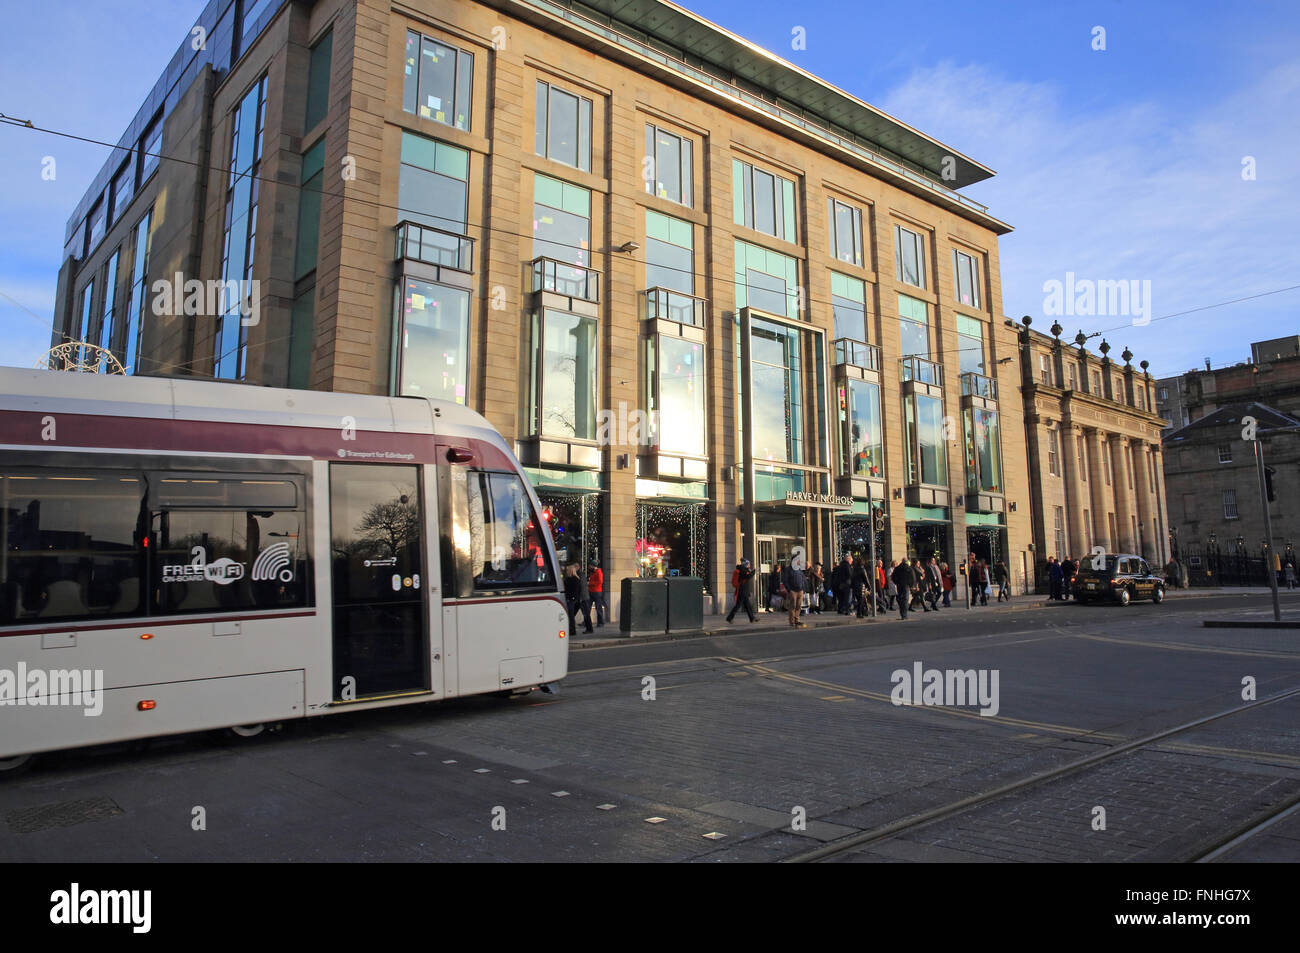 The Edinburgh tram, going past Harvey Nichols department store, on George Square in the New Town, in Scotland, UK Stock Photo